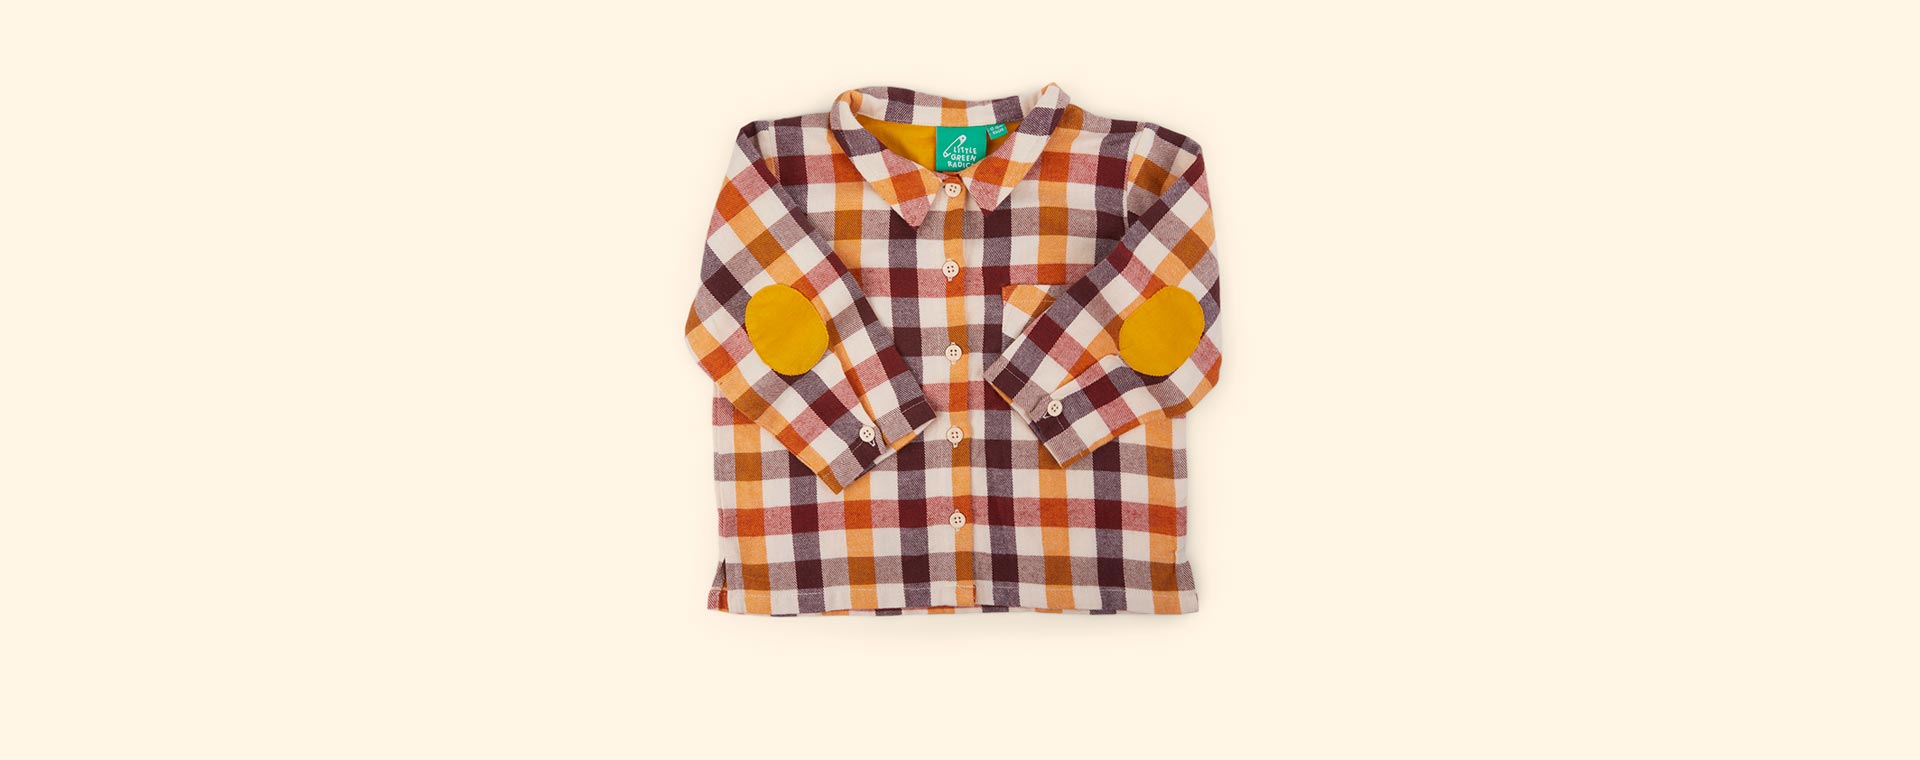 Autumn Leaves Little Green Radicals Checked Out & About Shirt